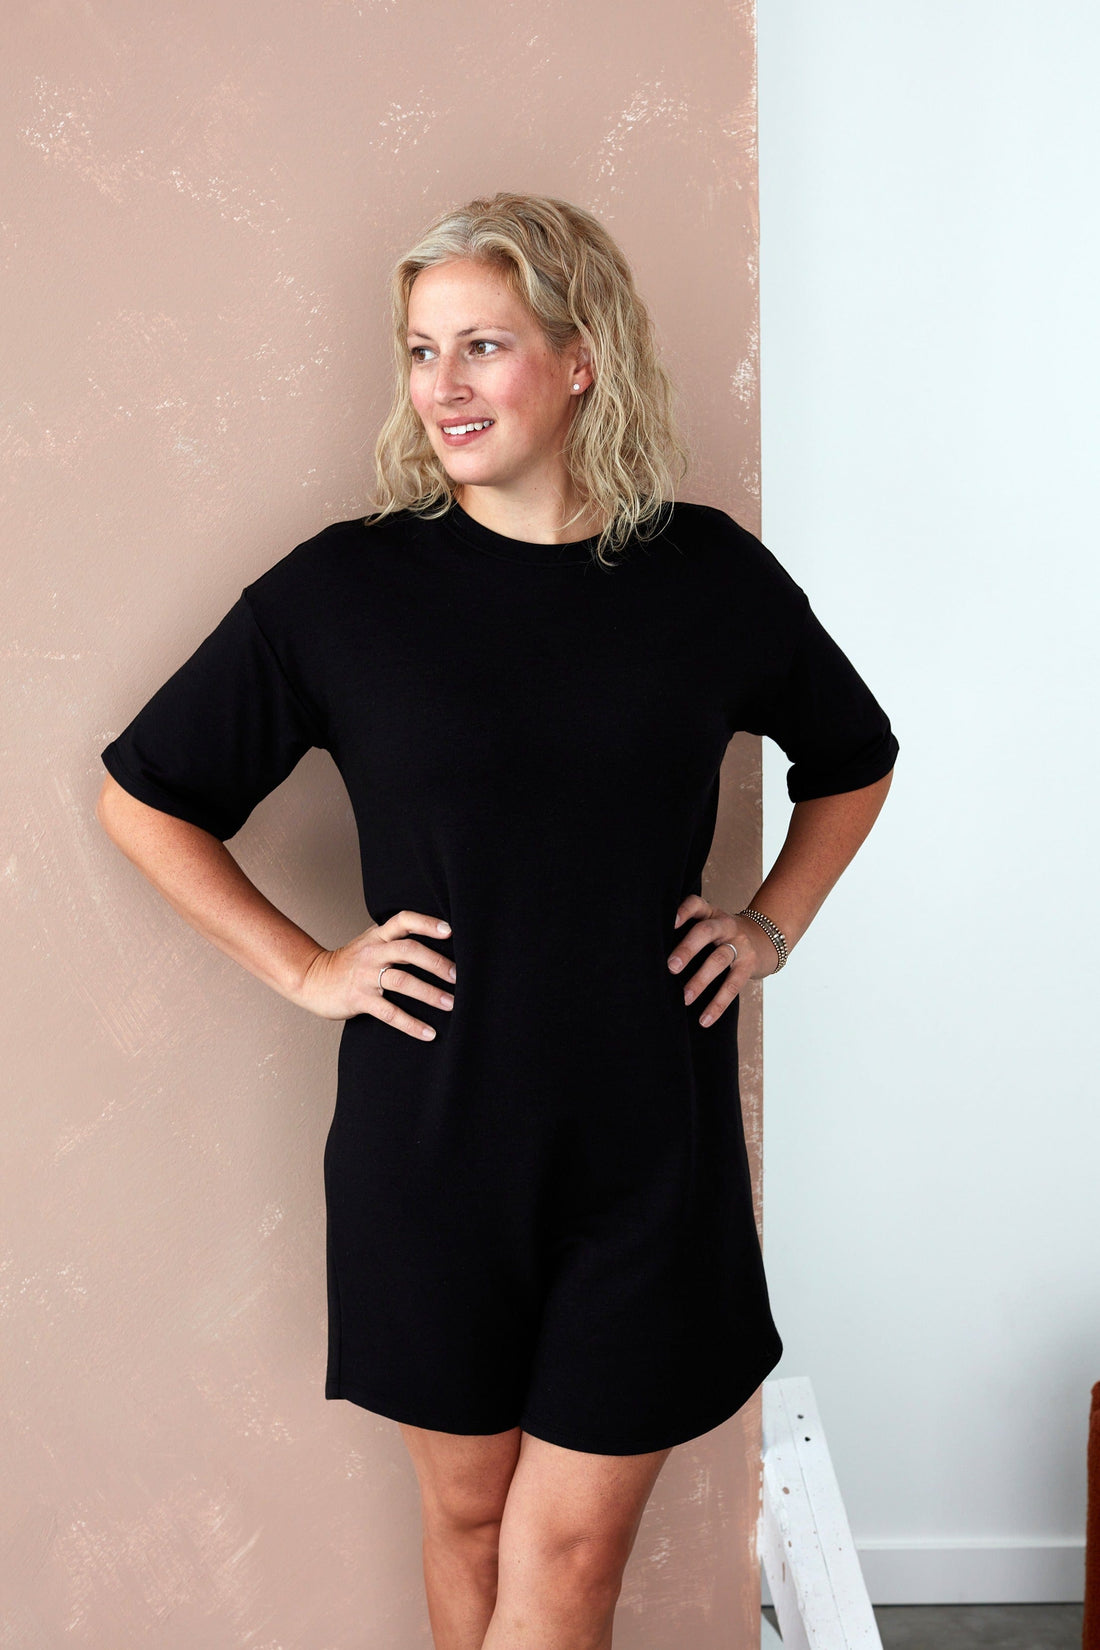 Relaxed Three-Quarter Dress in Onyx